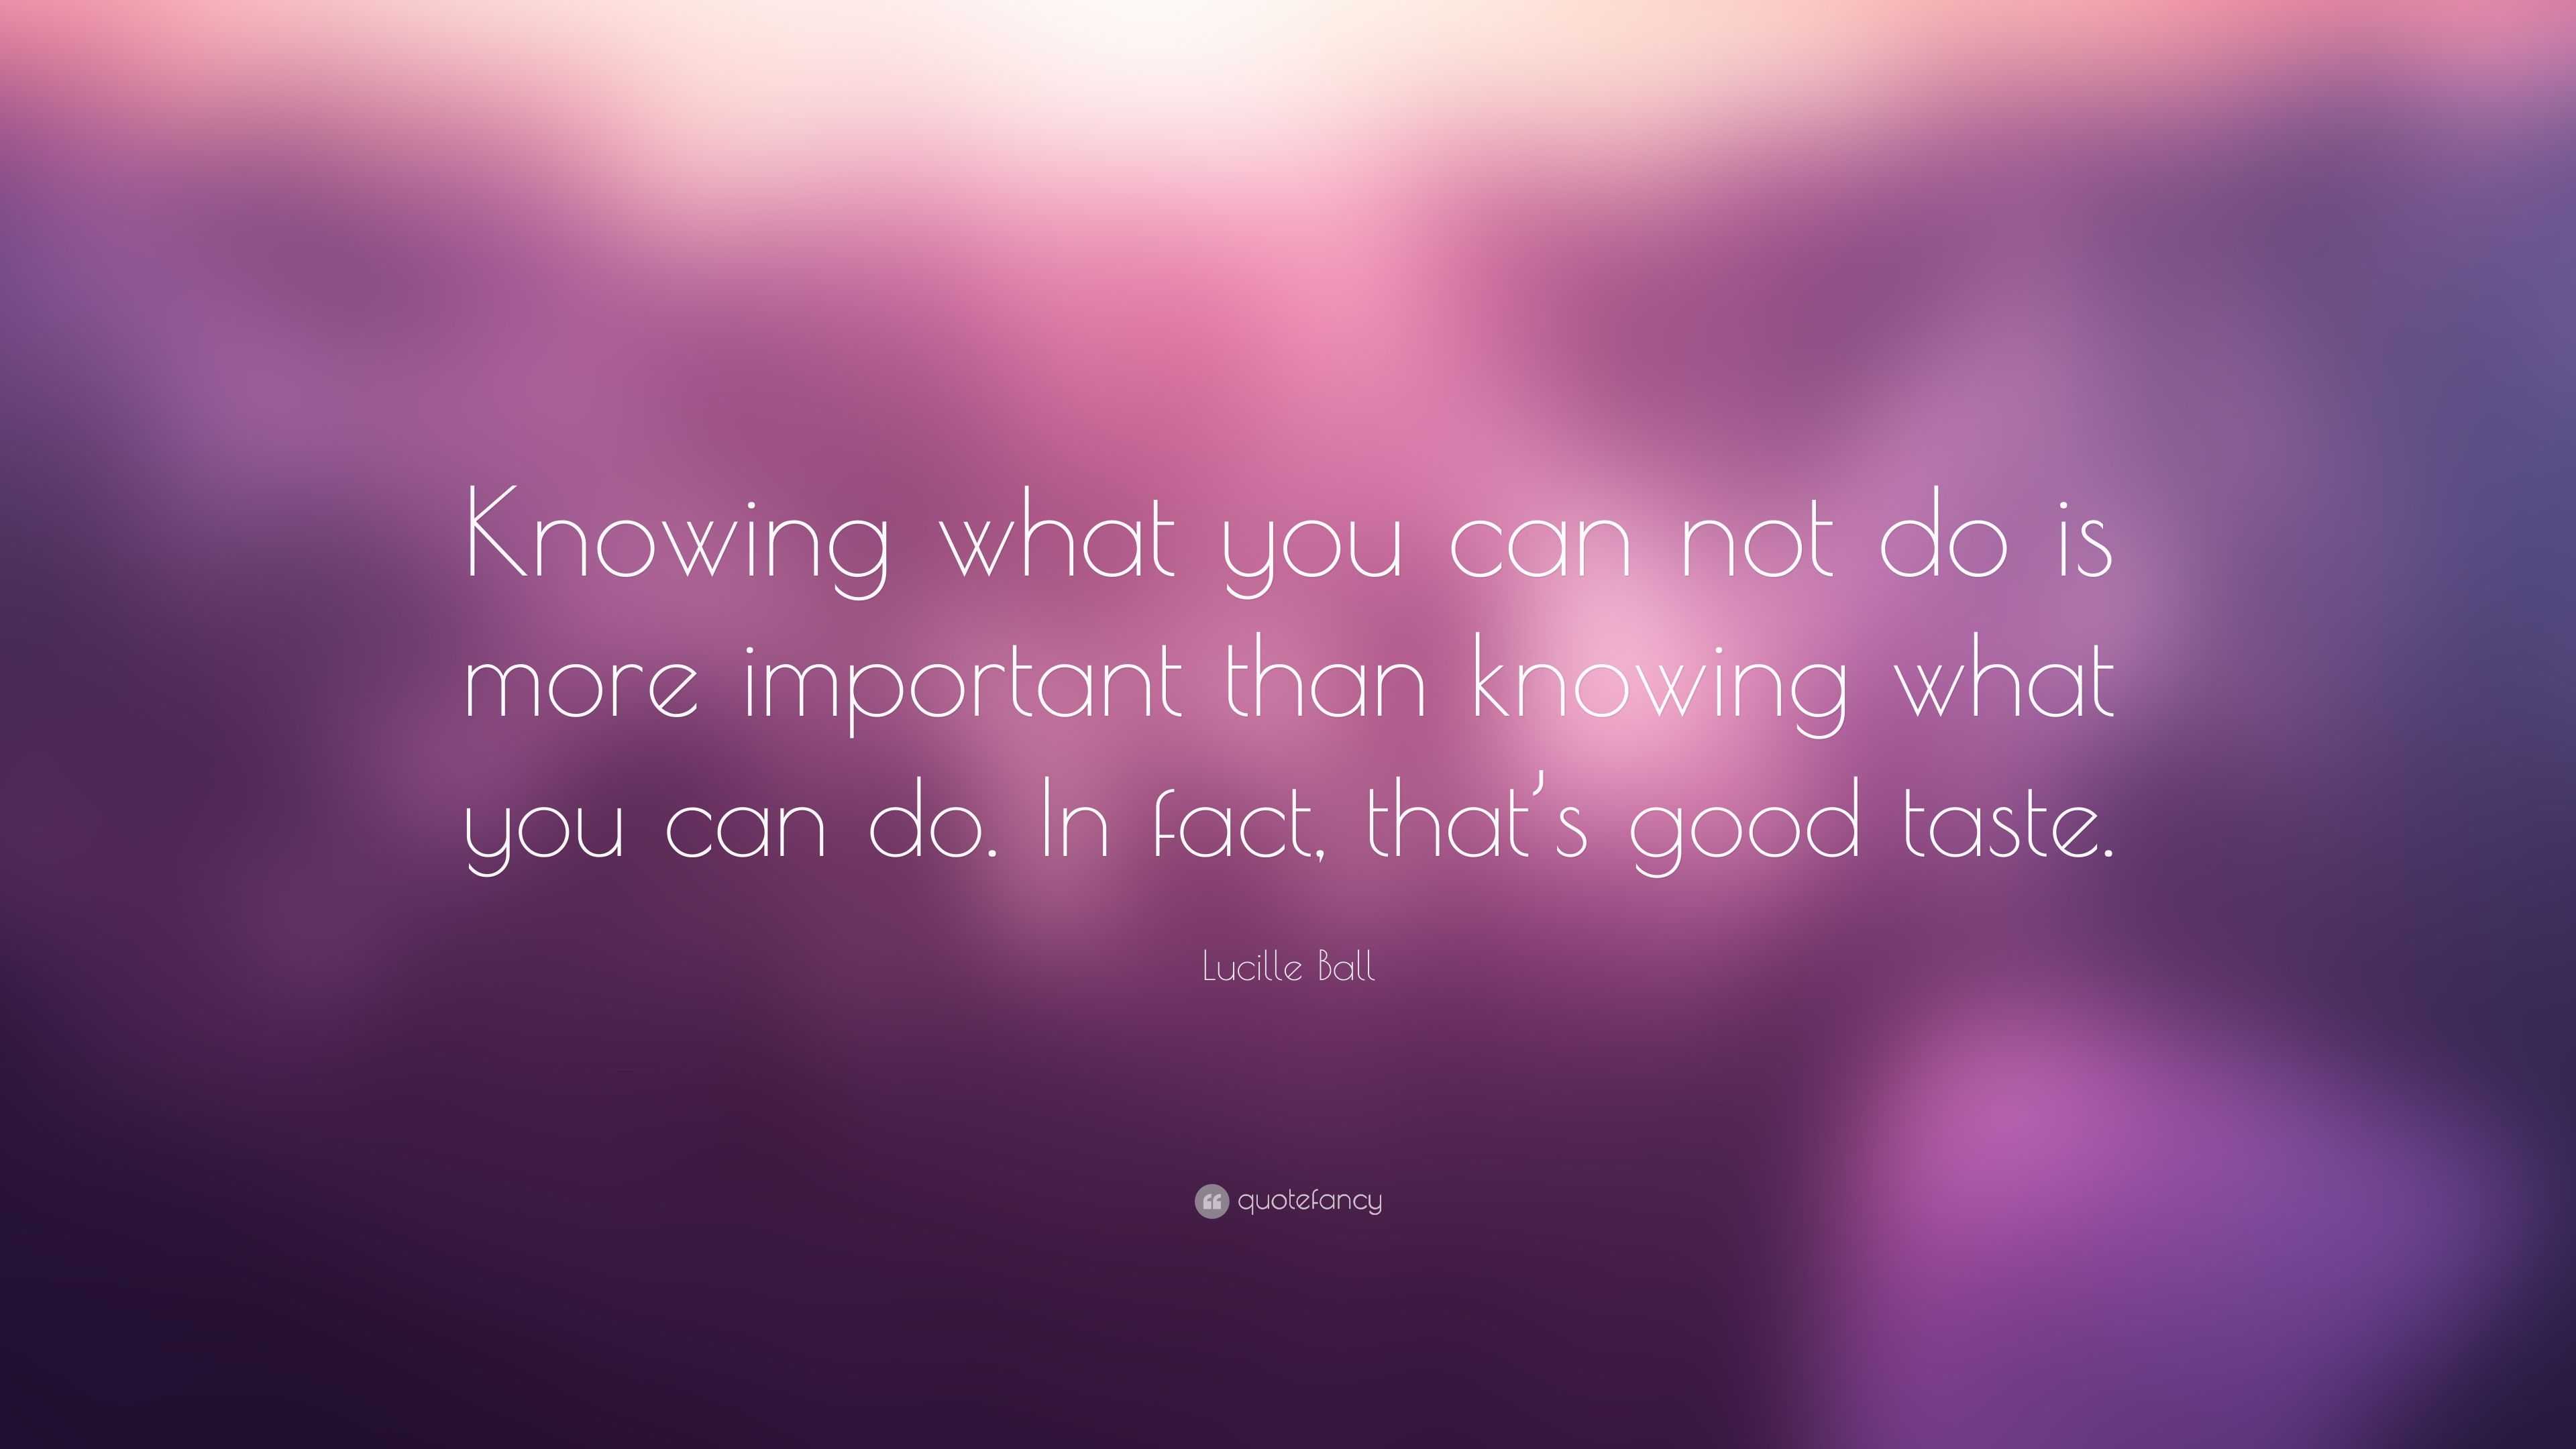 Lucille Ball Quote: “Knowing what you can not do is more important than ...